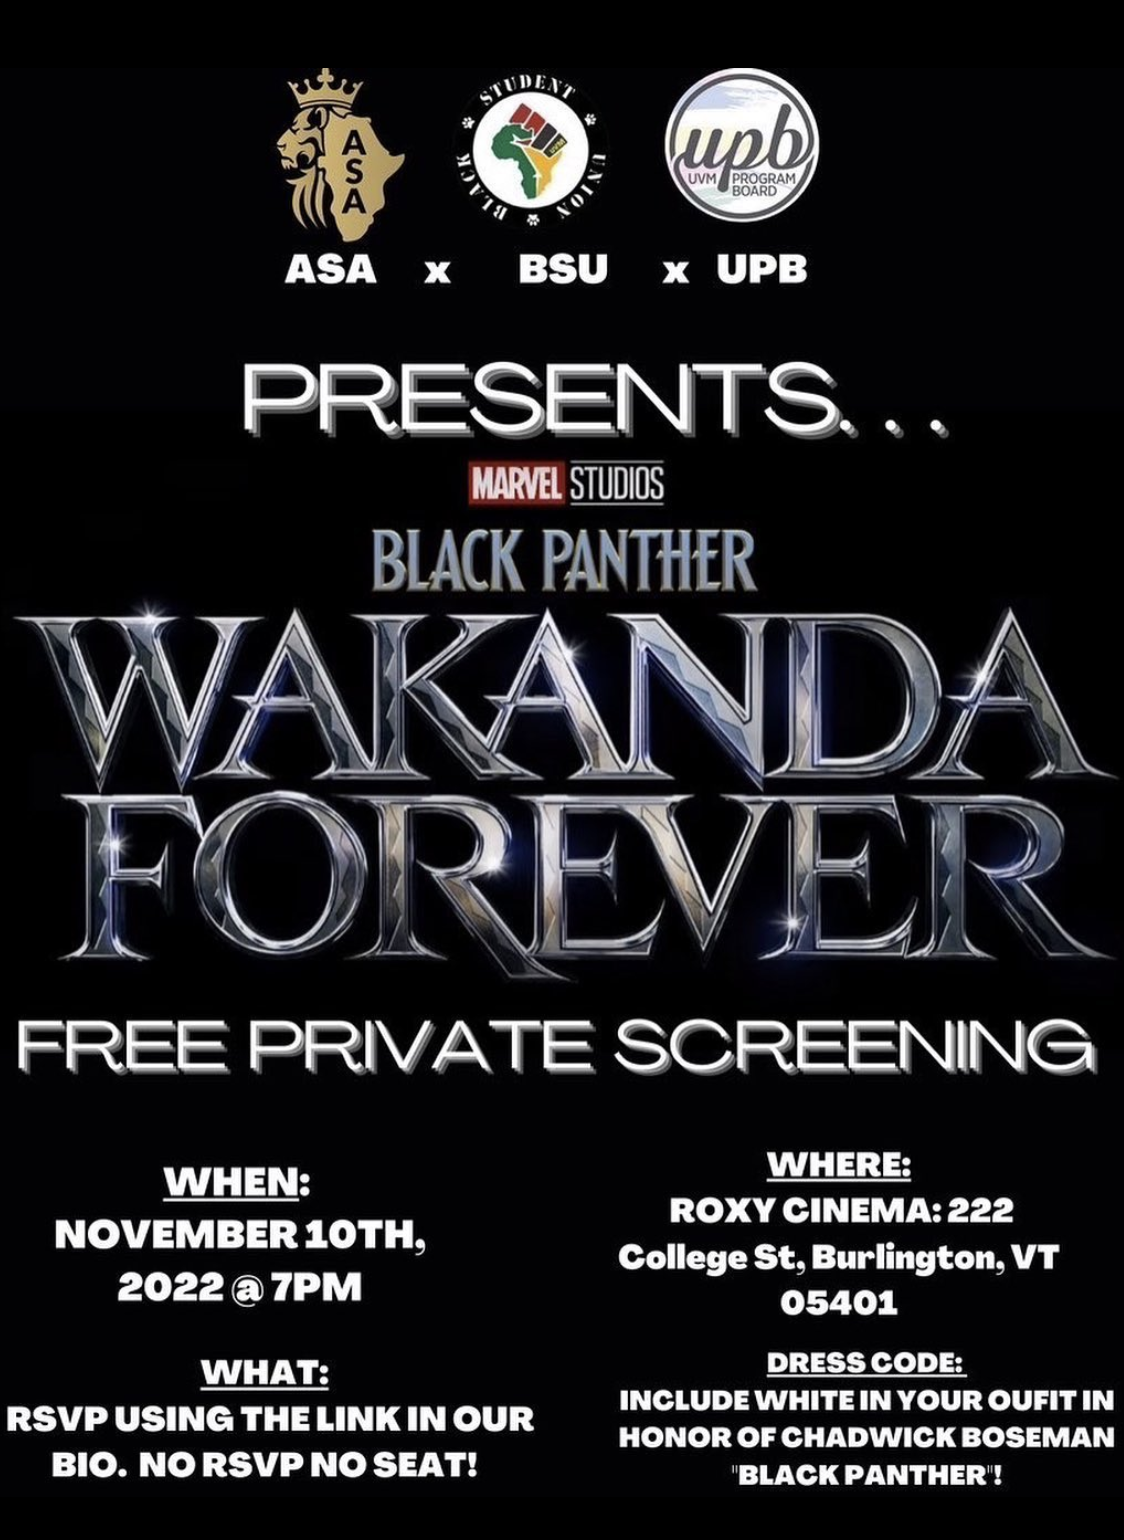 graphic for the private screening of Black Panther: Wakanda Forever